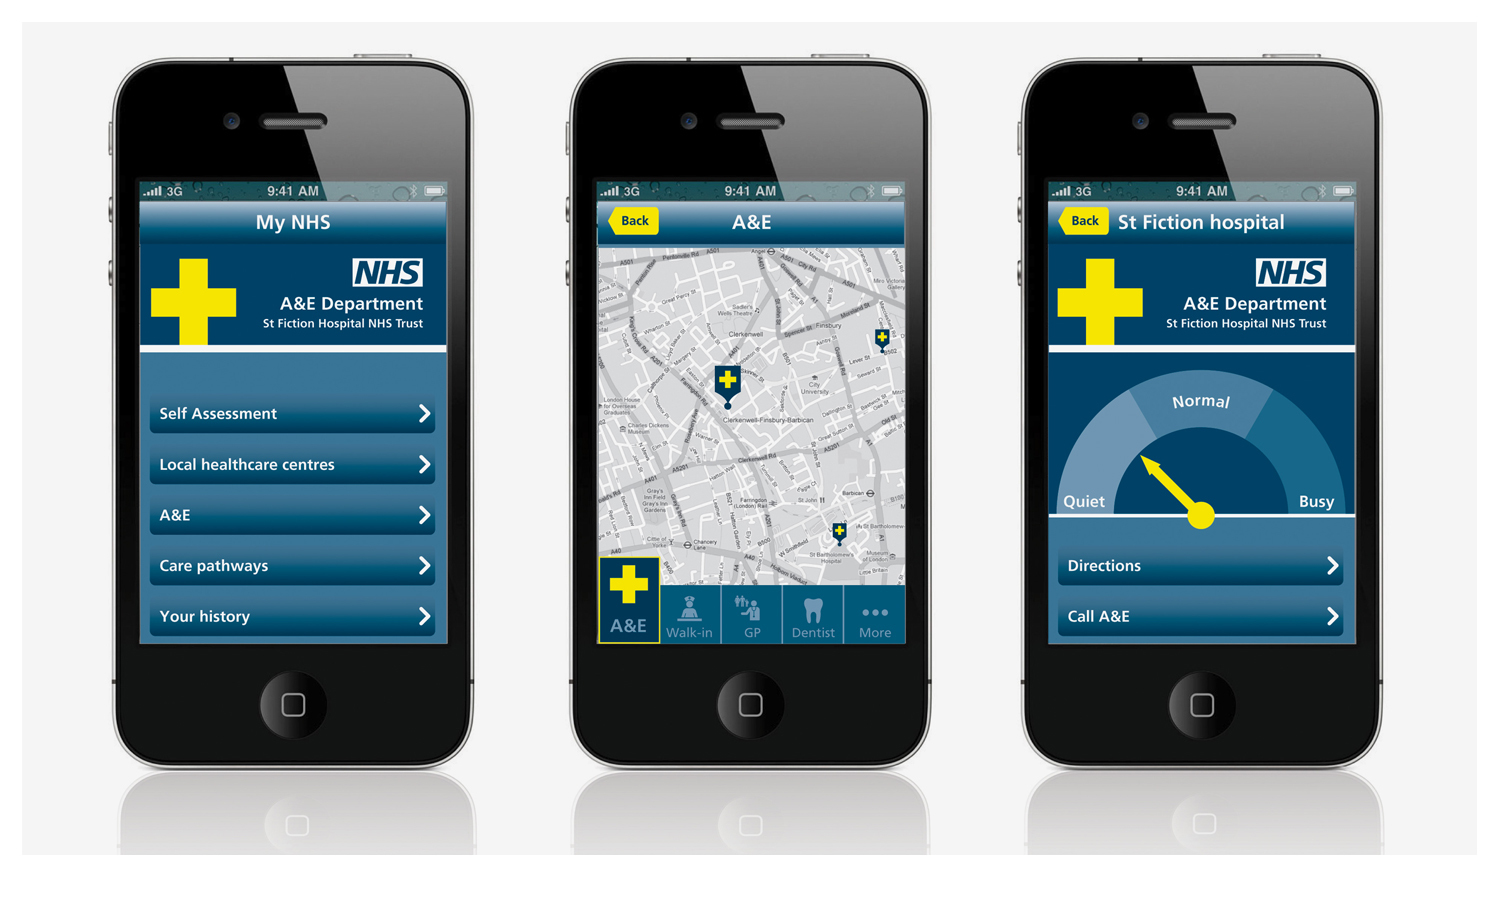  A smartphone app allows users to access information remotely to make informed decisions about which A&amp;E department to visit. 